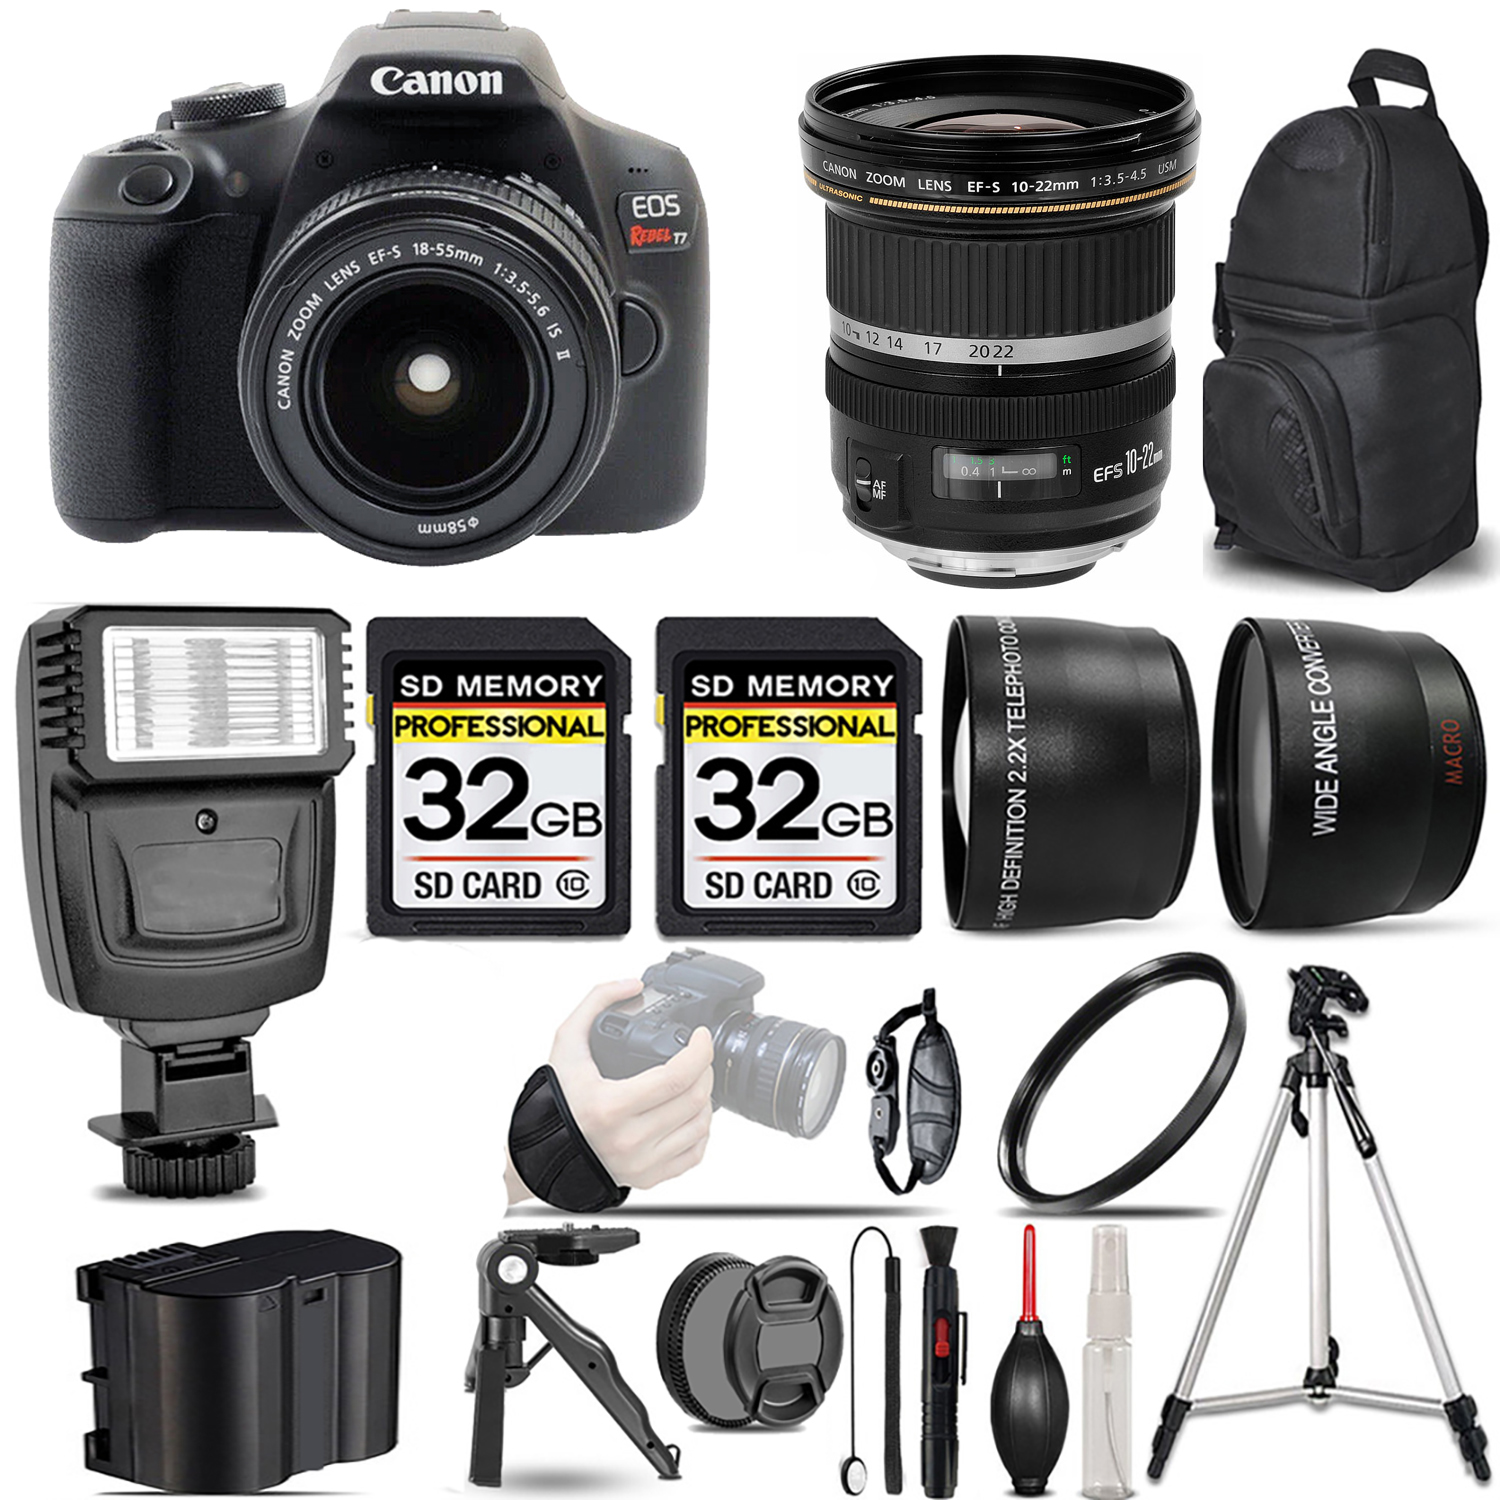 Rebel T7 with 18-55mm Lens + 10-22mm f/3.5- 4.5 USM Lens + Flash + 64GB - Kit *FREE SHIPPING*